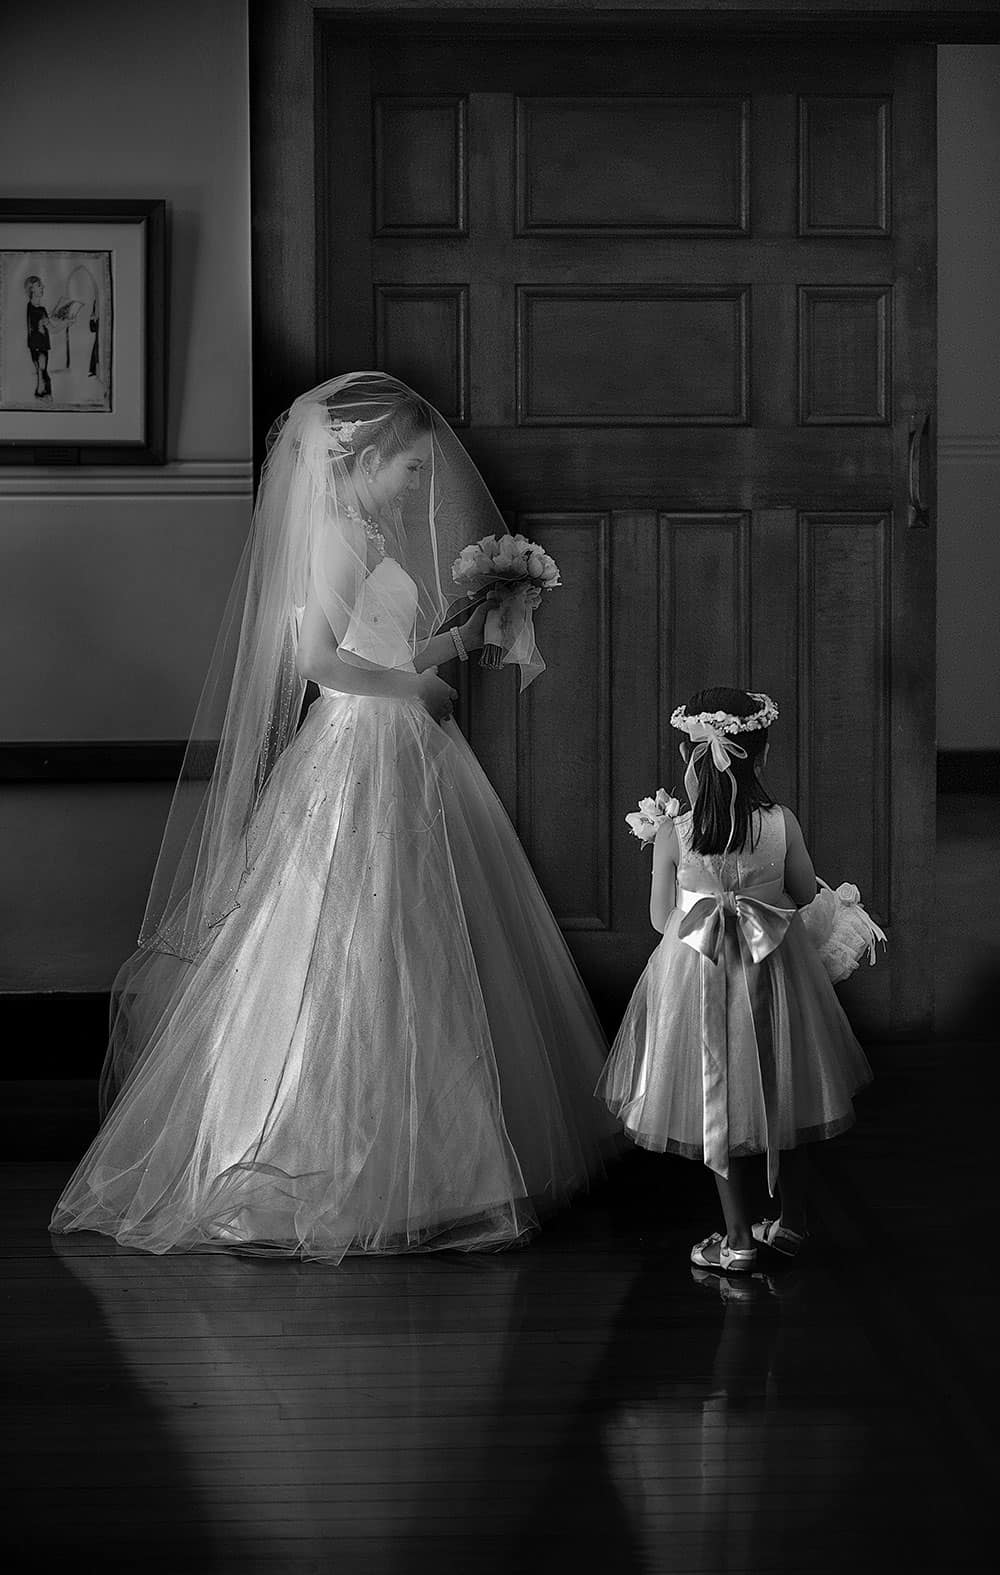 Bride and flower girl image by Christopher Thomas Photography